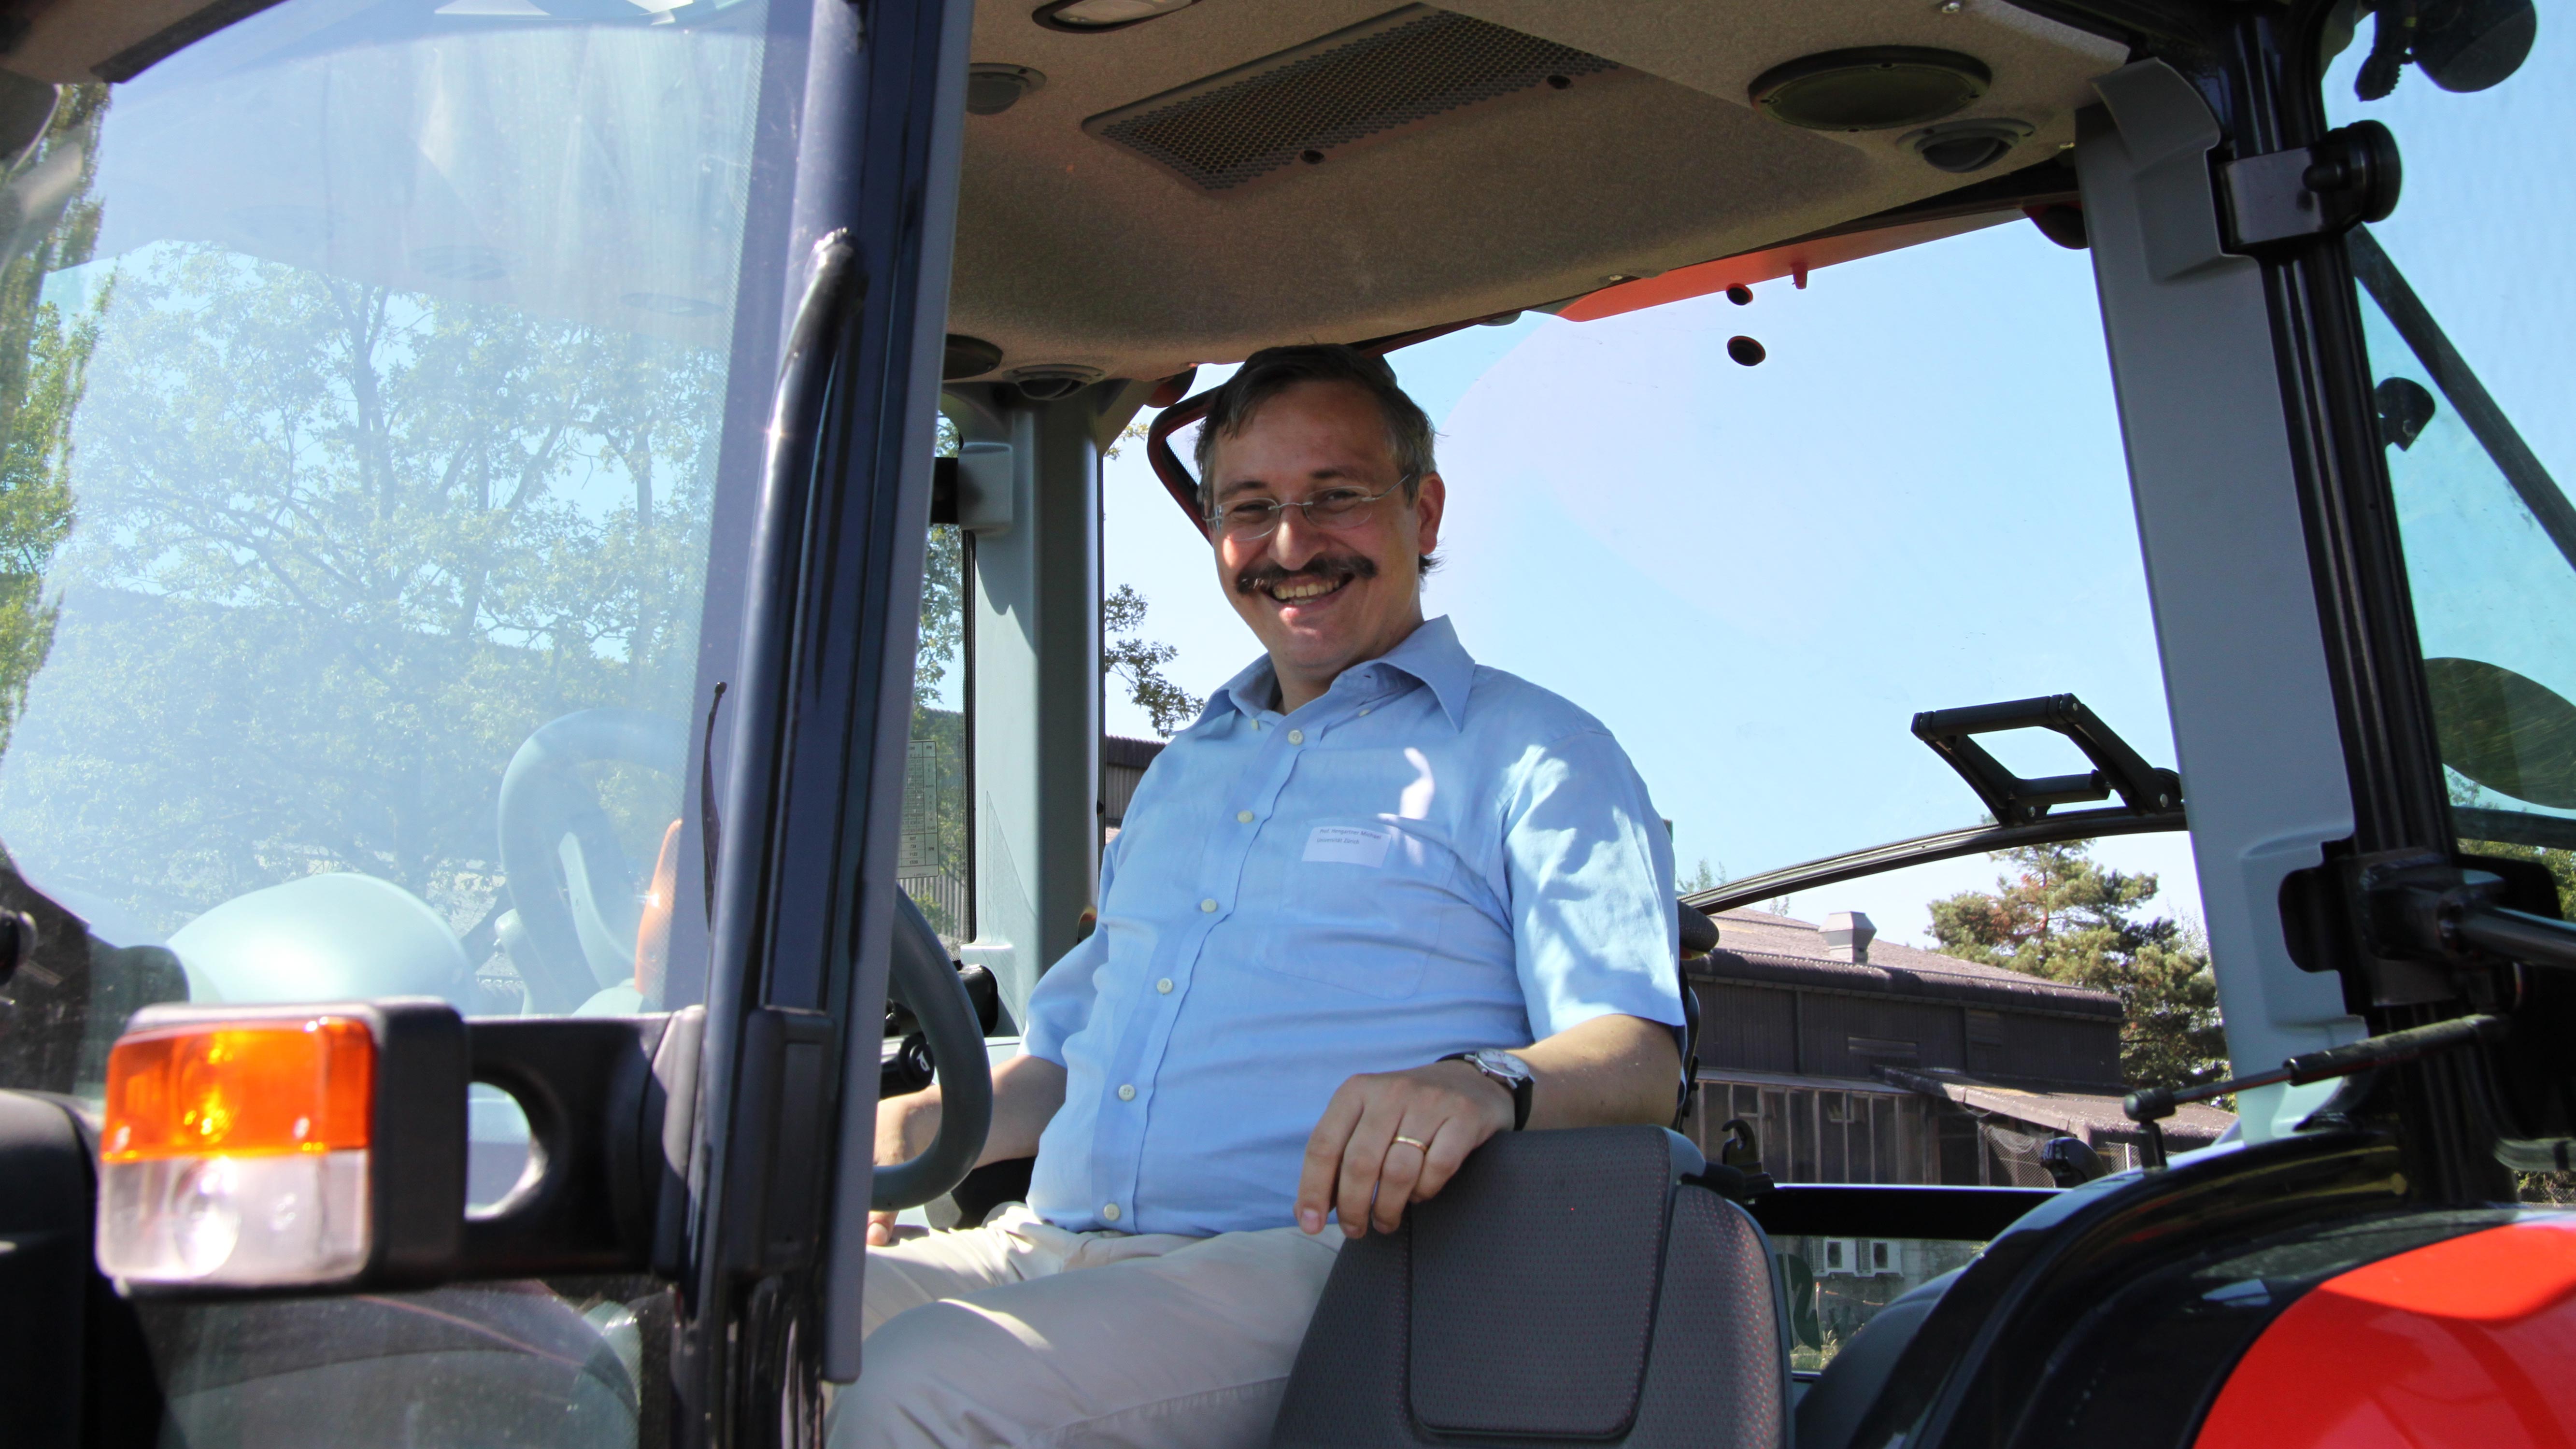 <p>Digitalization and open access were two of the key features of Michael Hengartner&rsquo;s time as President of UZH. But he is also capable of embracing the analog, like here in August 2015 at the Center of Competence for Food and Agriculture &ldquo;AgroVet-Strickhof&rdquo; in Lindau, which opened in 2017 after a two-year construction phase.</p> (Image: Adrian Ritter)